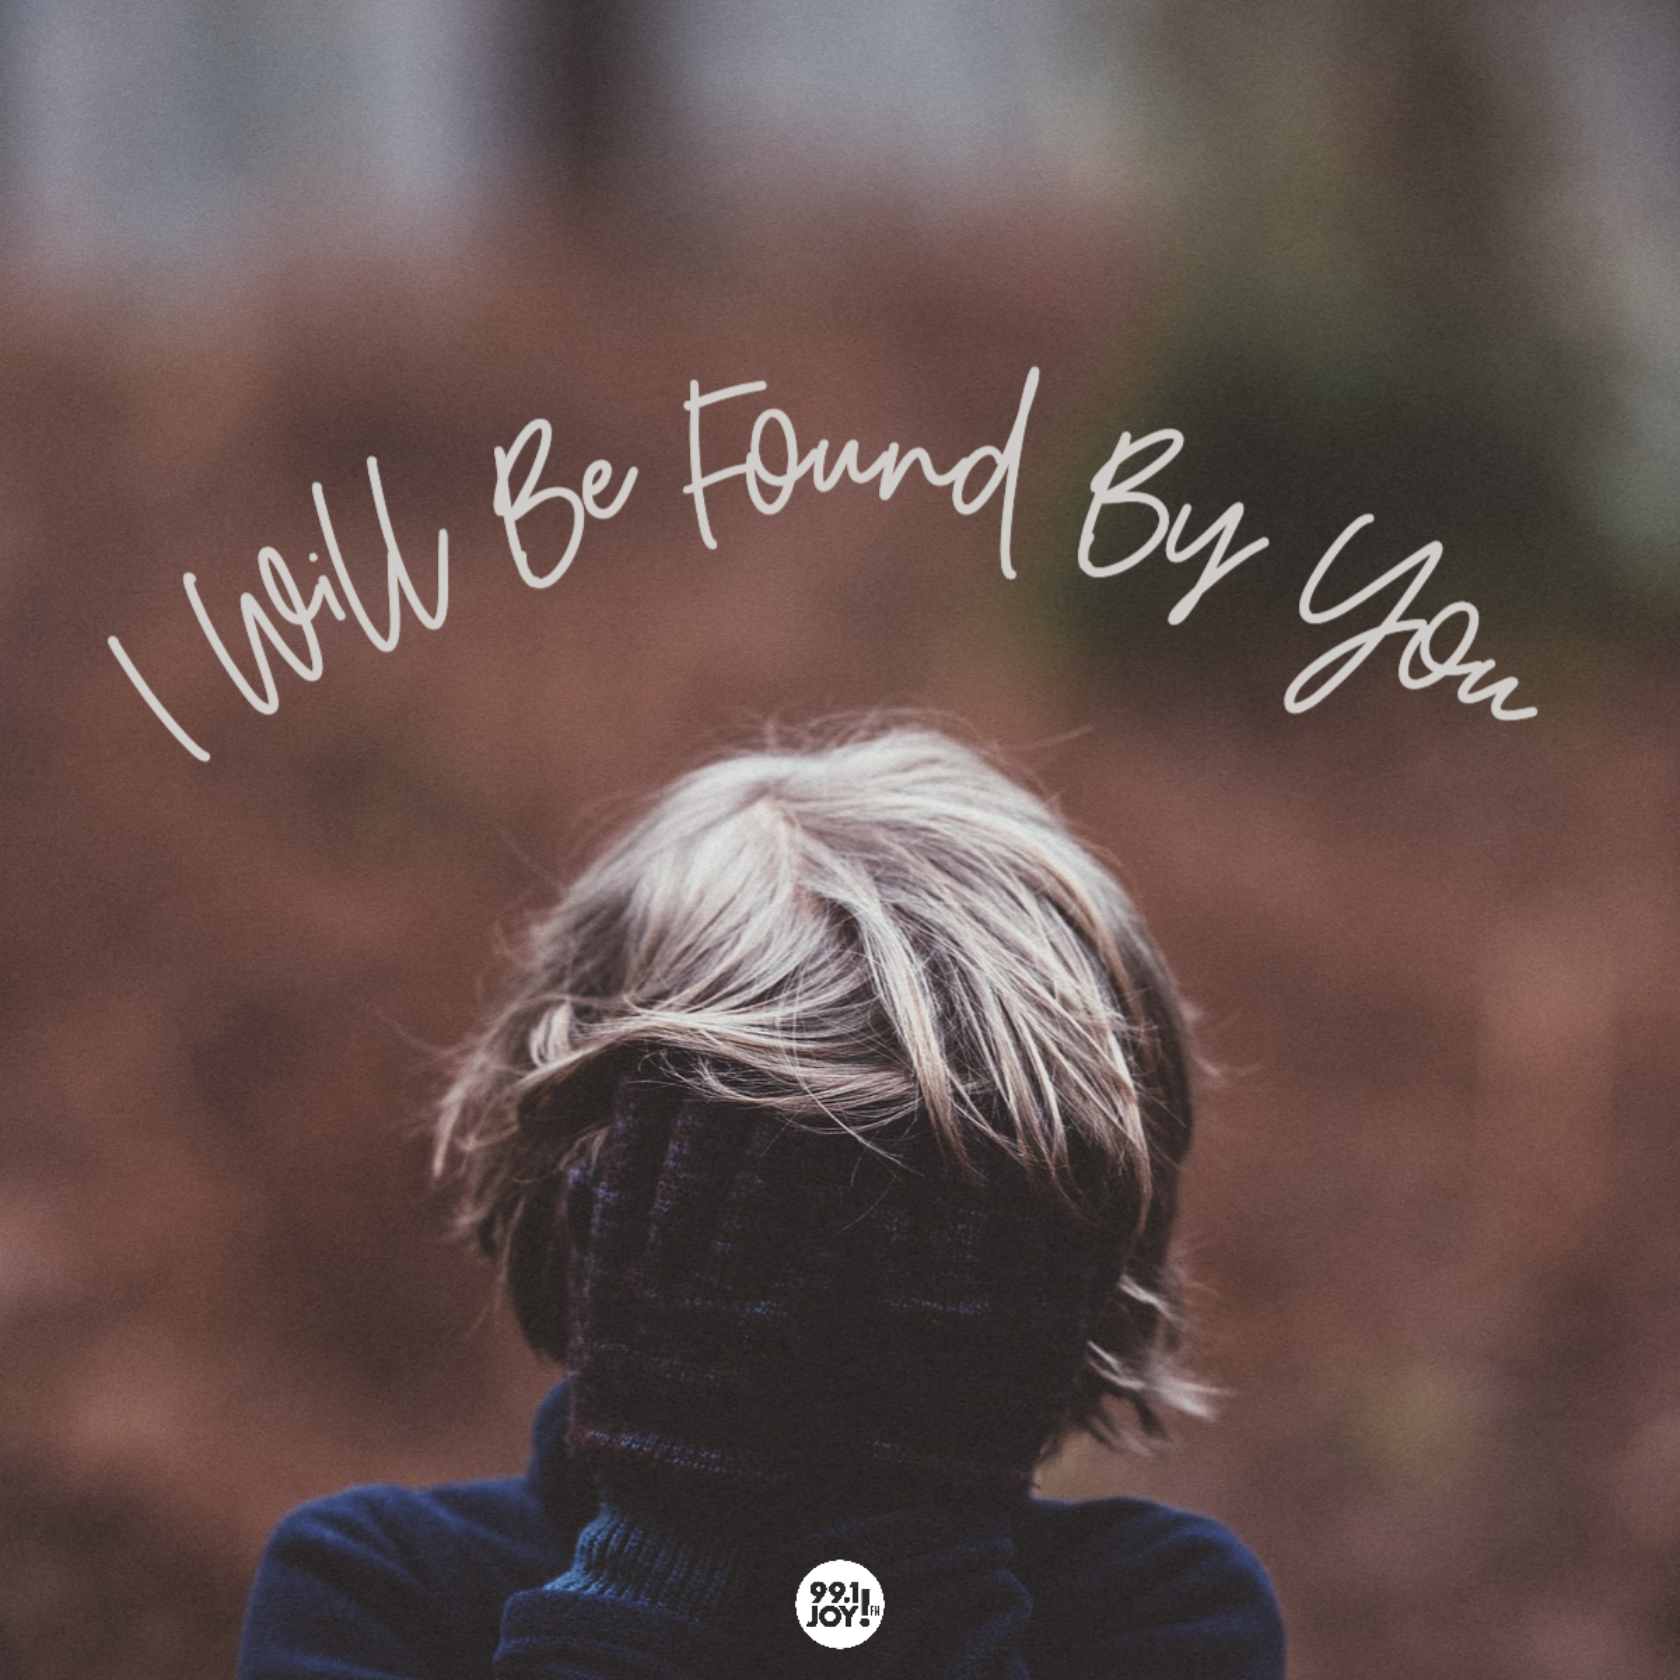 I Will Be Found By You